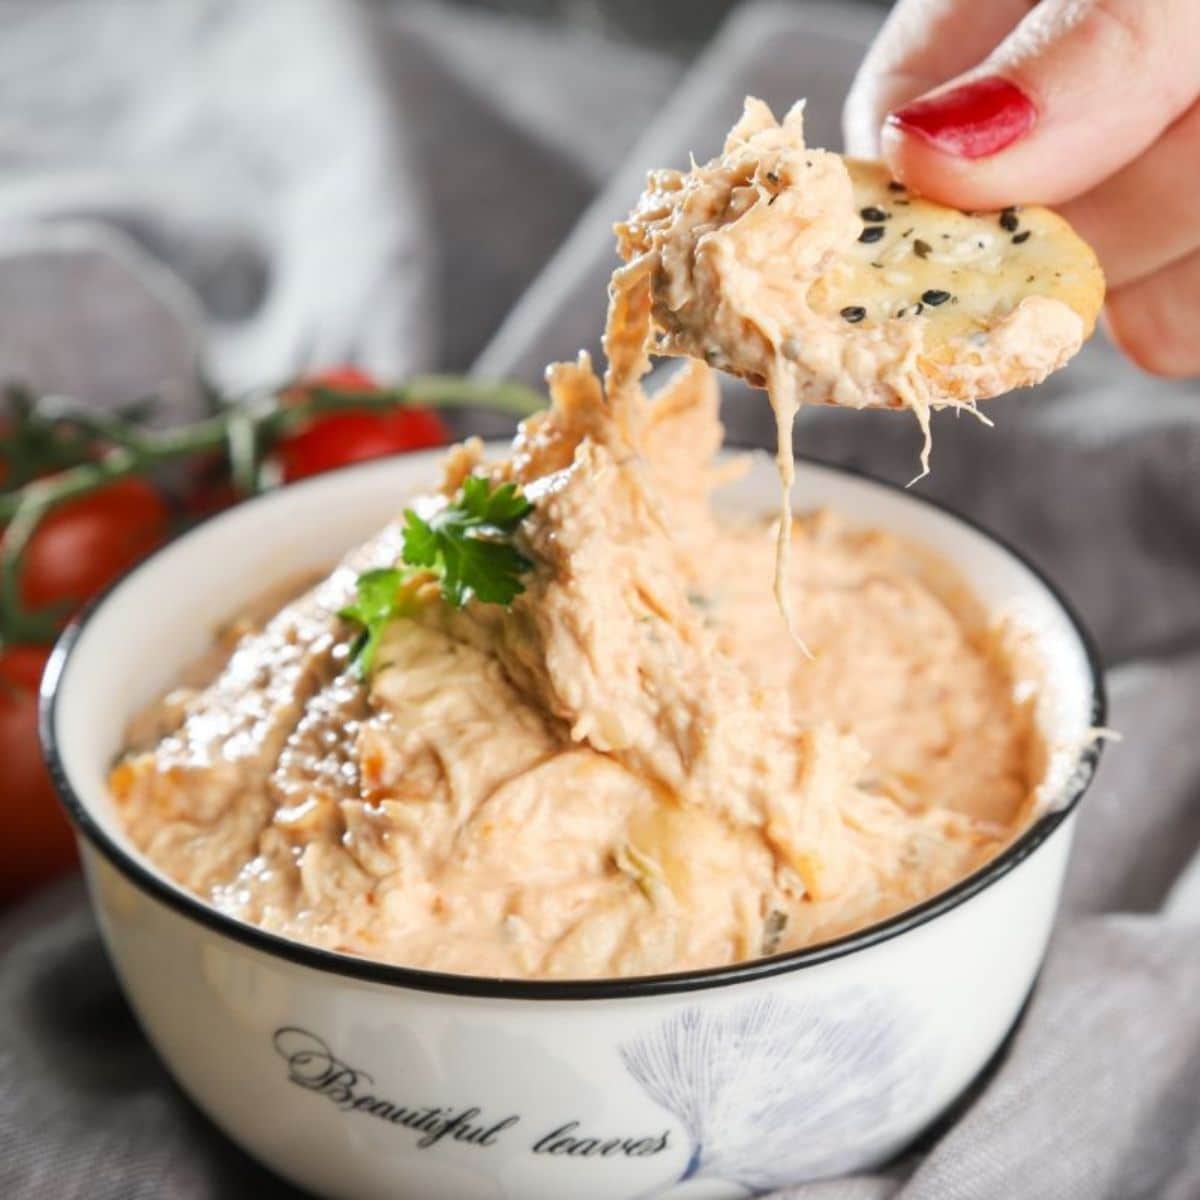 hand with red nails dipping into white bowl of dip with cracker